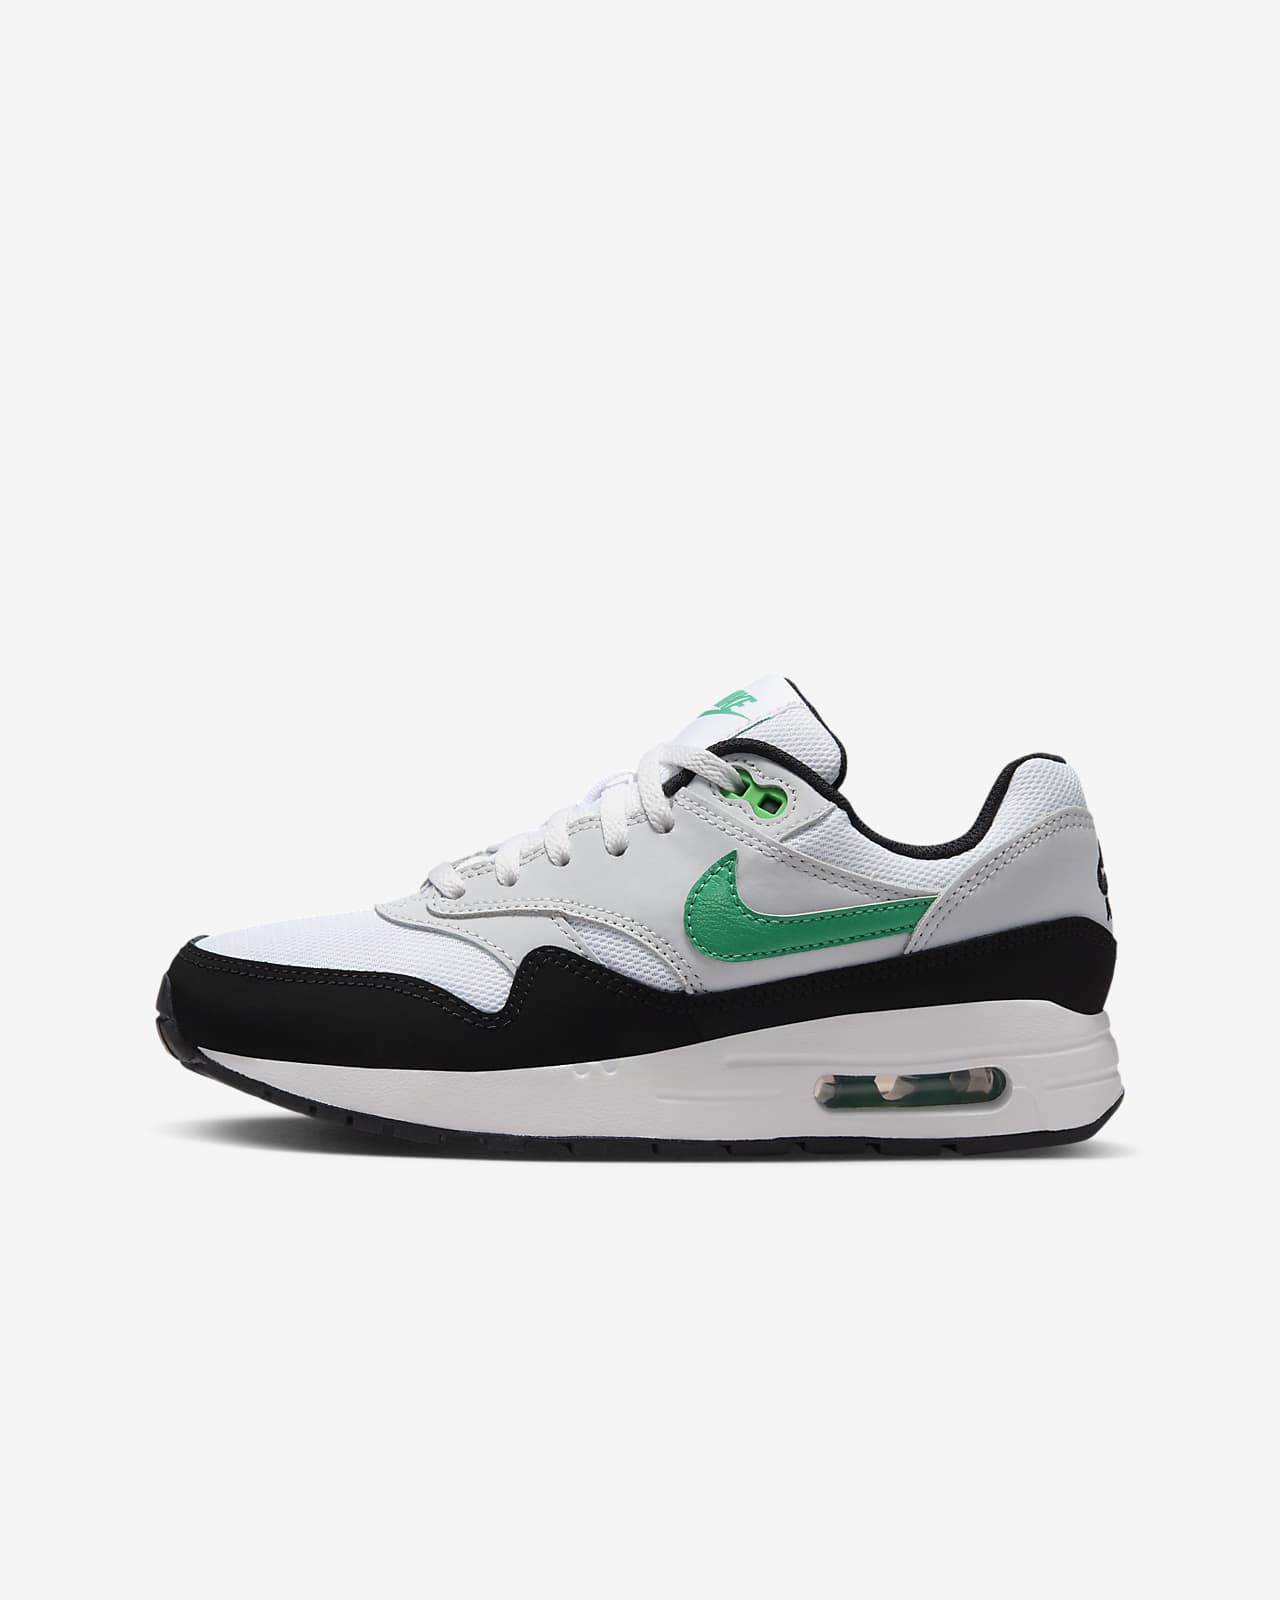 Air Max 1 Older Kids' Shoes